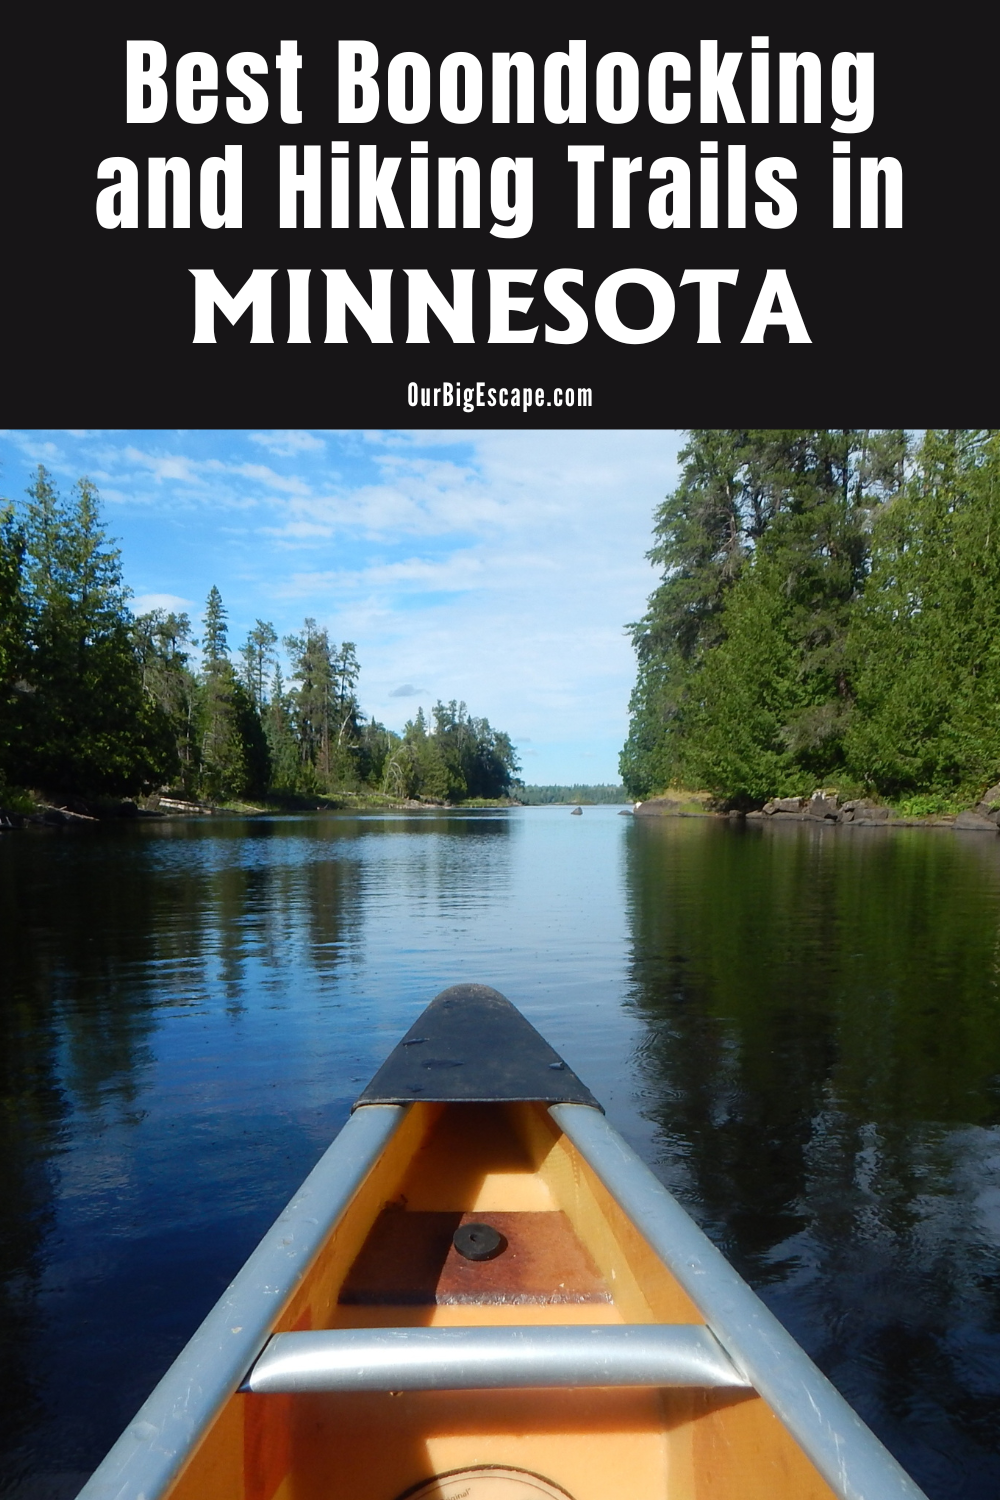 Best Boondocking and Hiking Trails in Minnesota